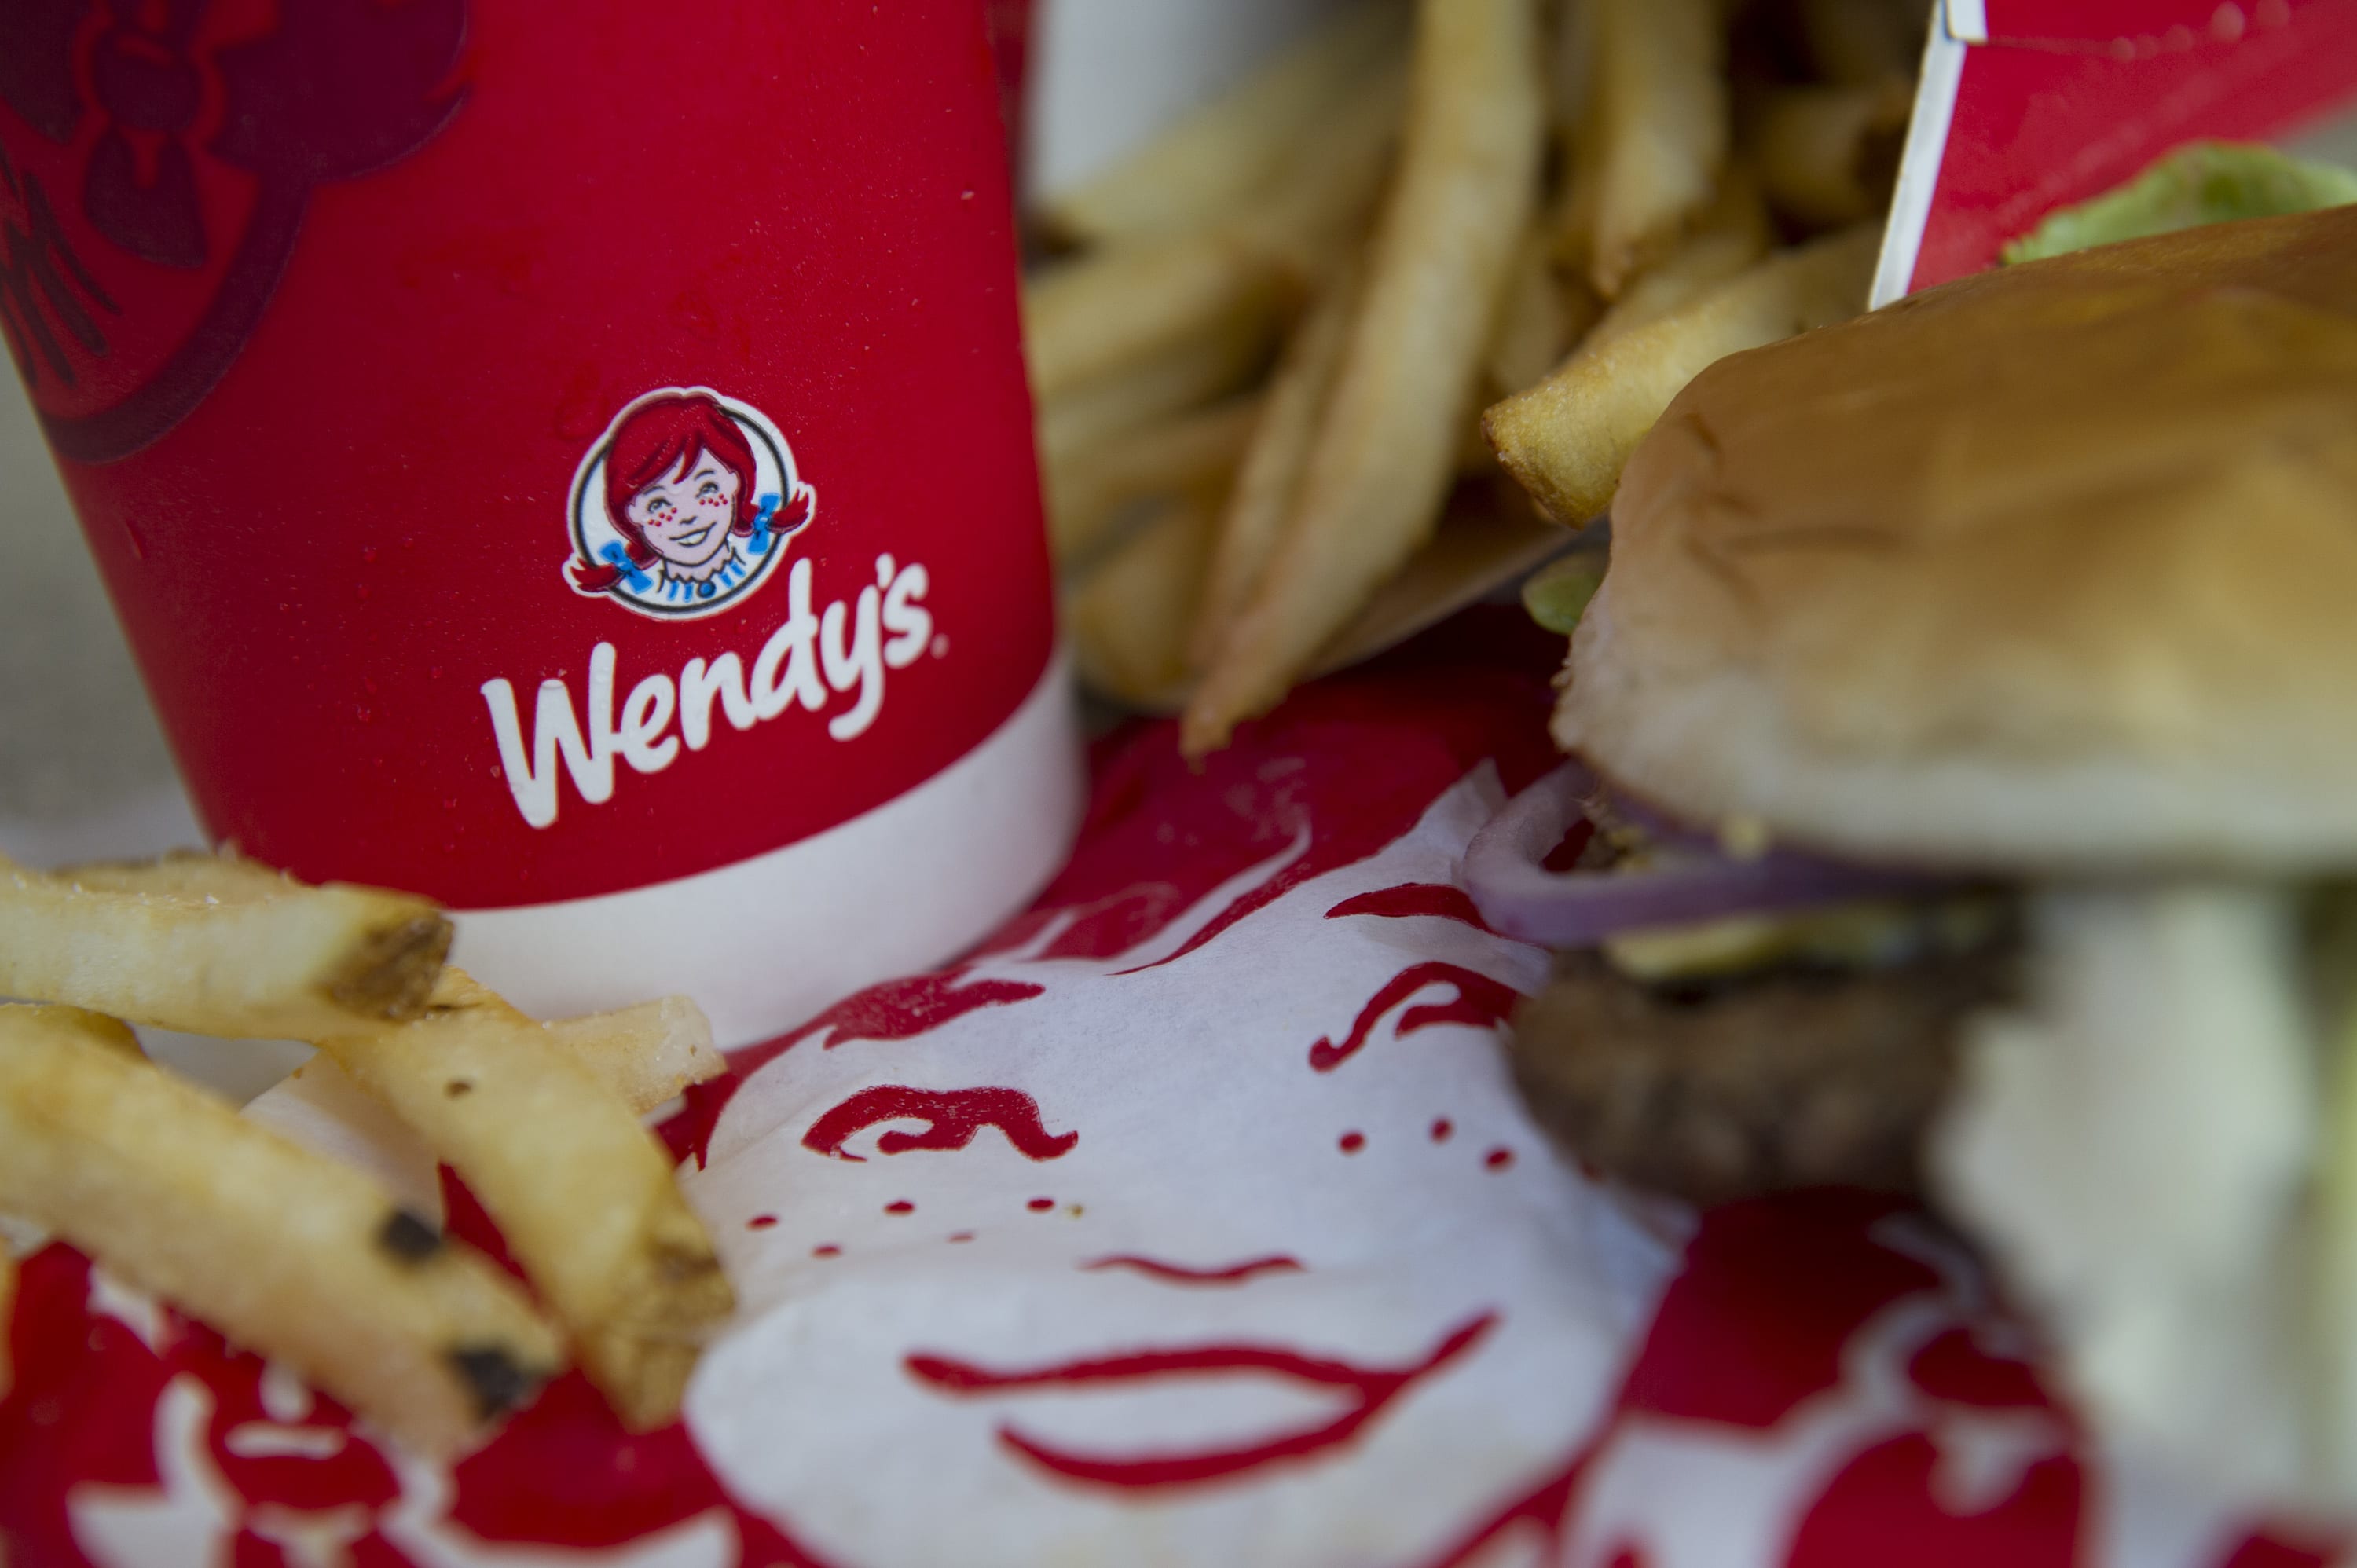 Stocks making the biggest moves midday: Wendy's, Starbucks, Maxar